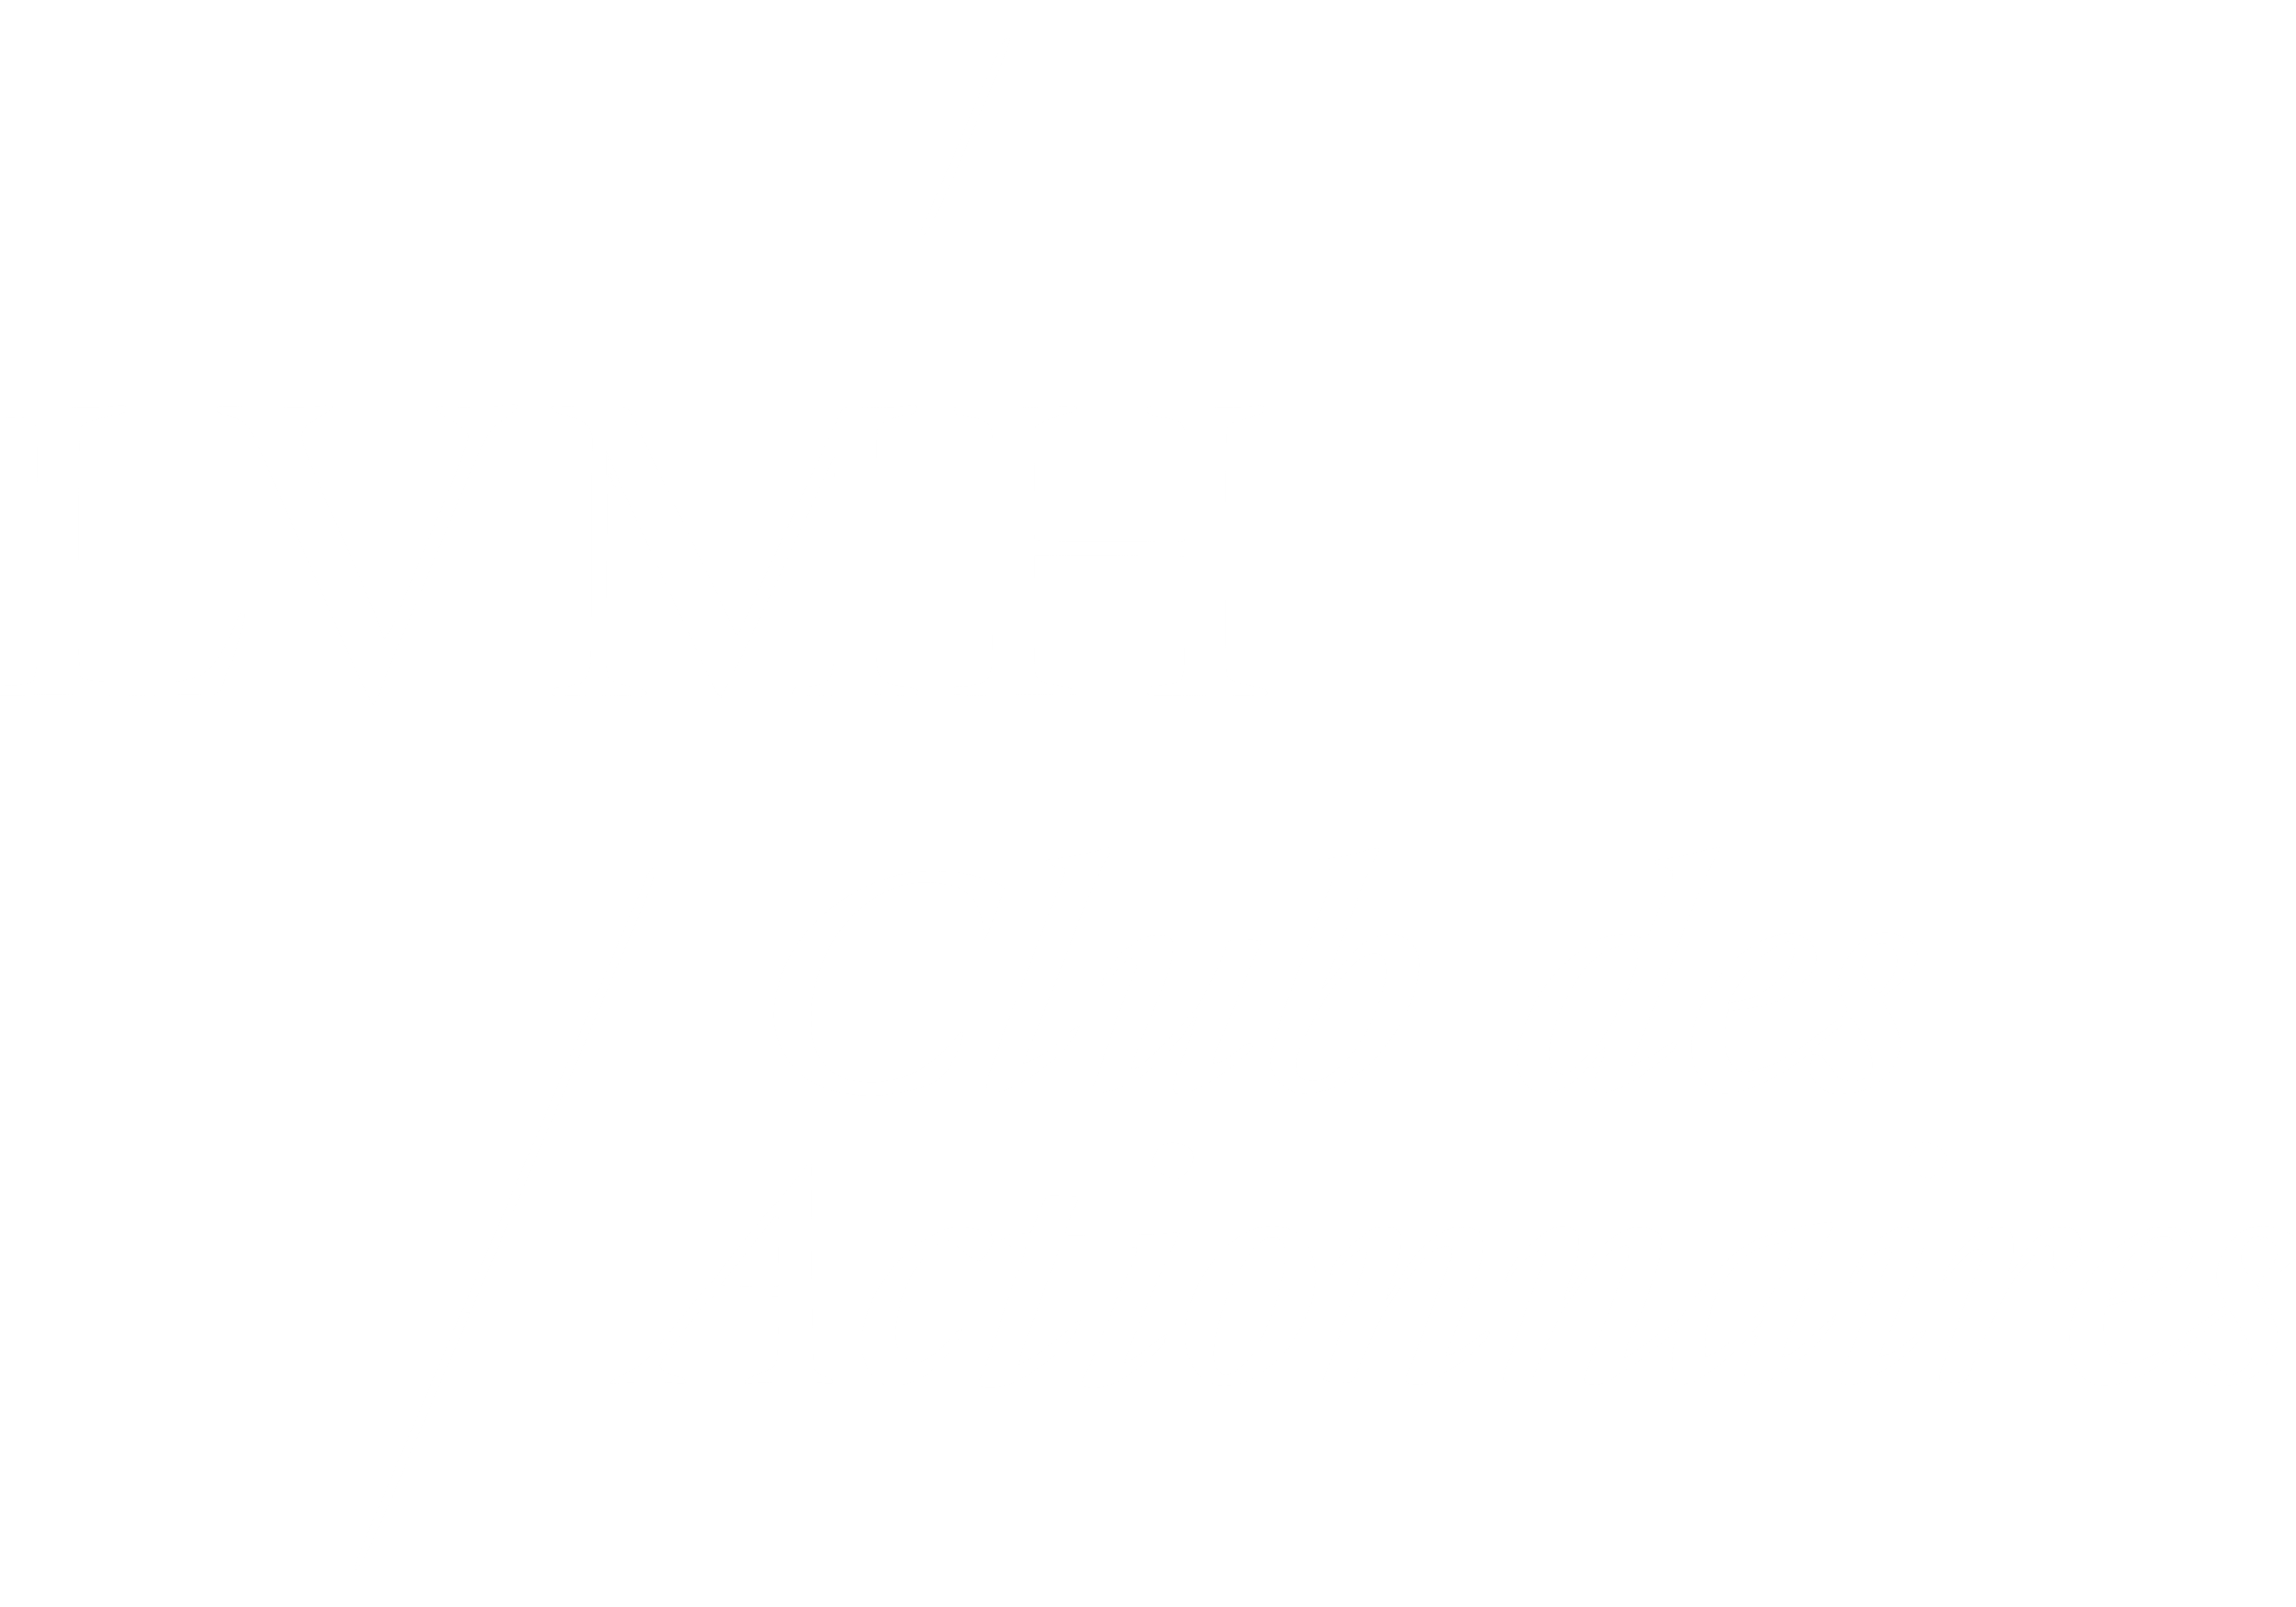 Actionnaires individuels - LVMH